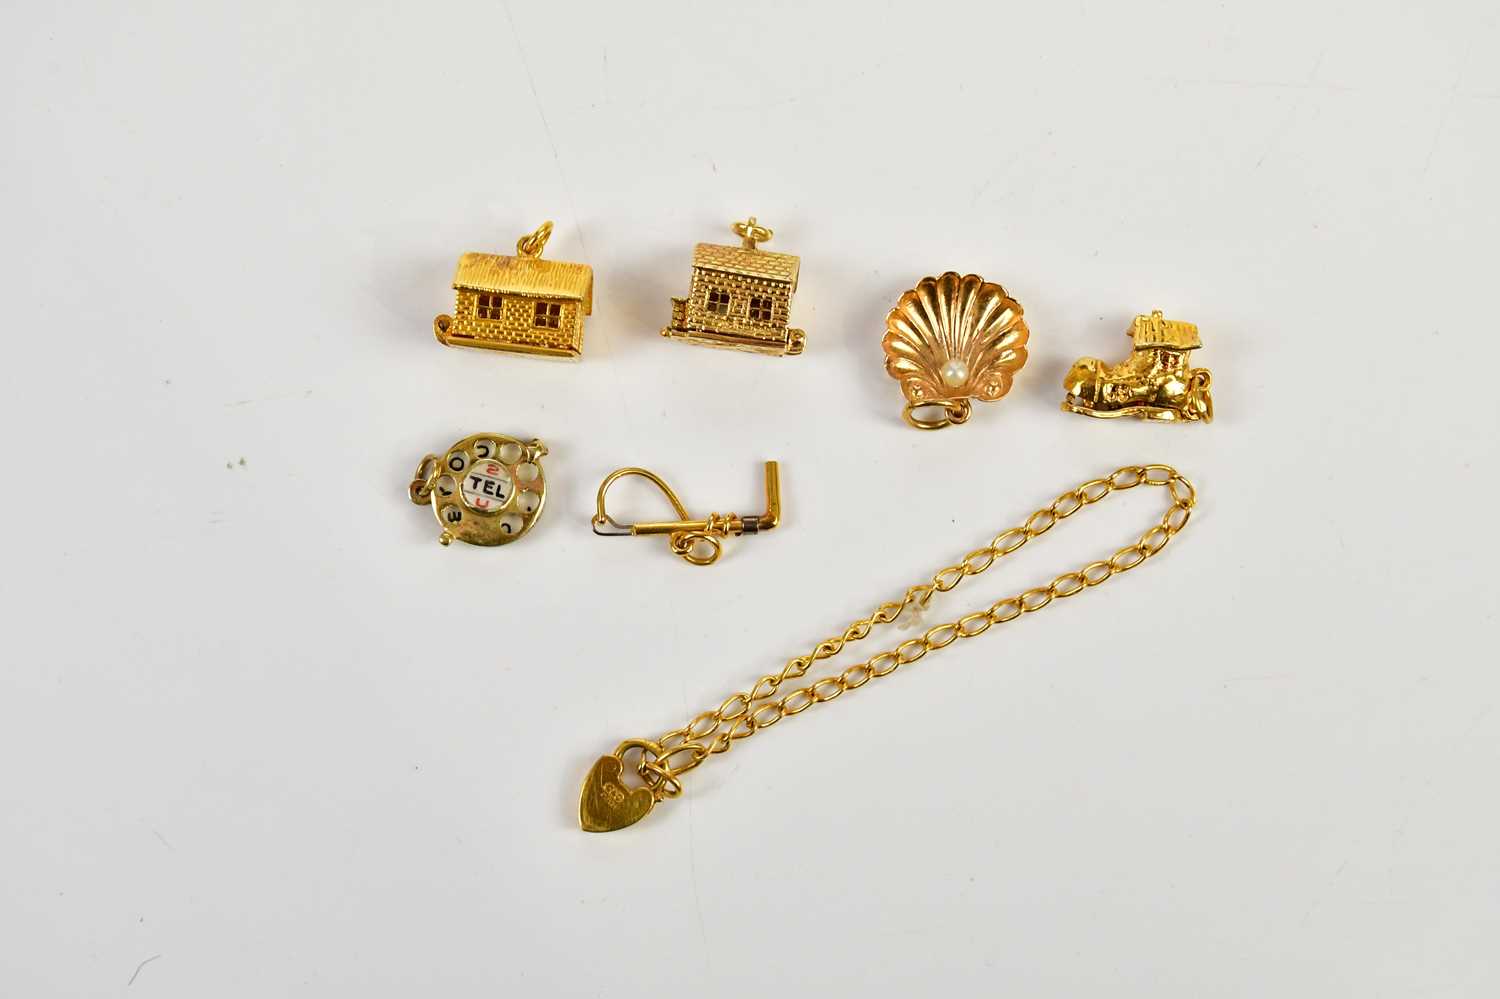 A collection of six 9ct gold charms including a riding crop, cottage, telephone dial, also a 9ct